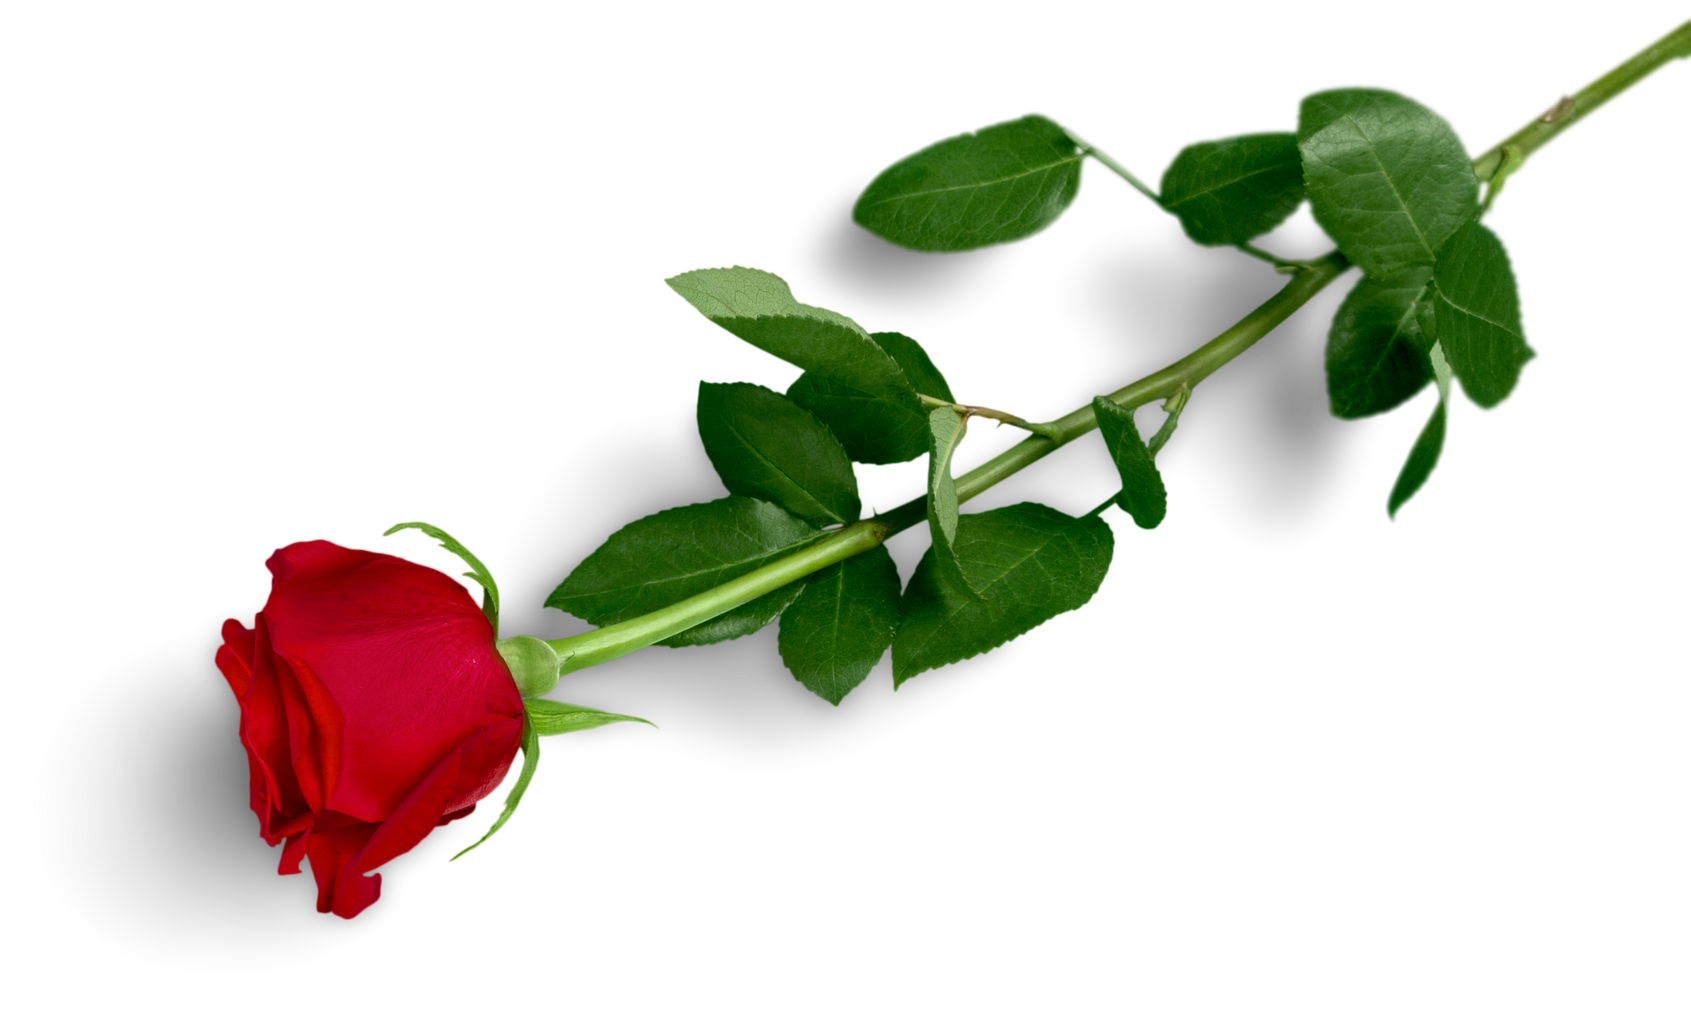 Red Rose with Green Stem